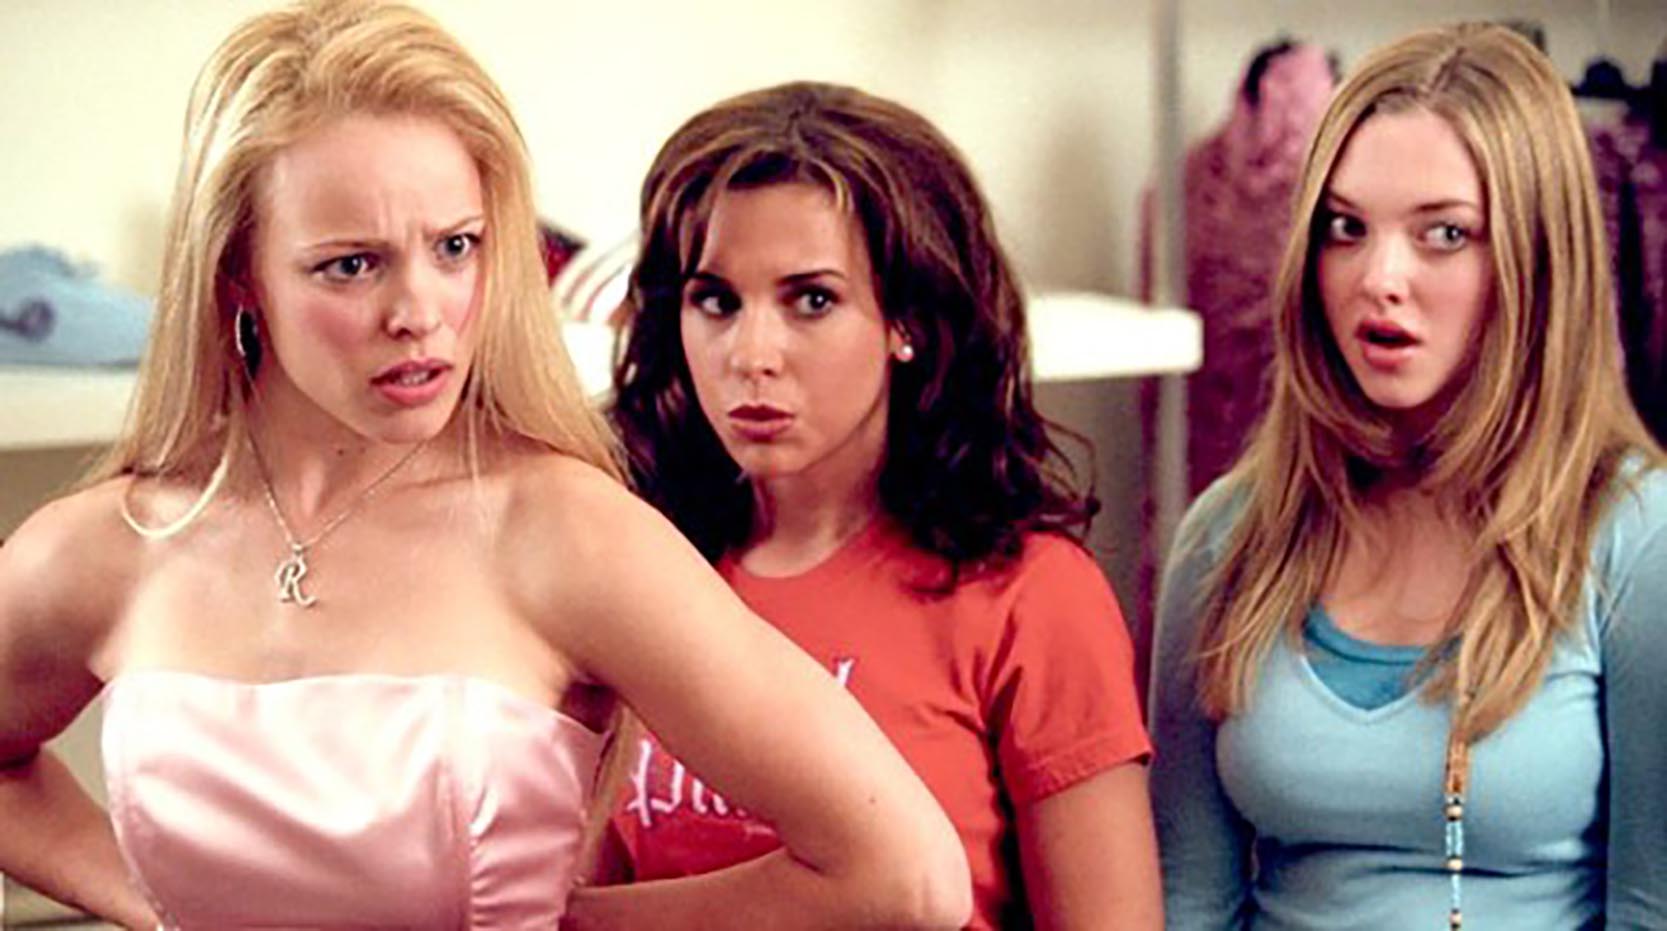 Shut Up! 'Mean Girls' Might Be Coming to a Makeup Palette Near You